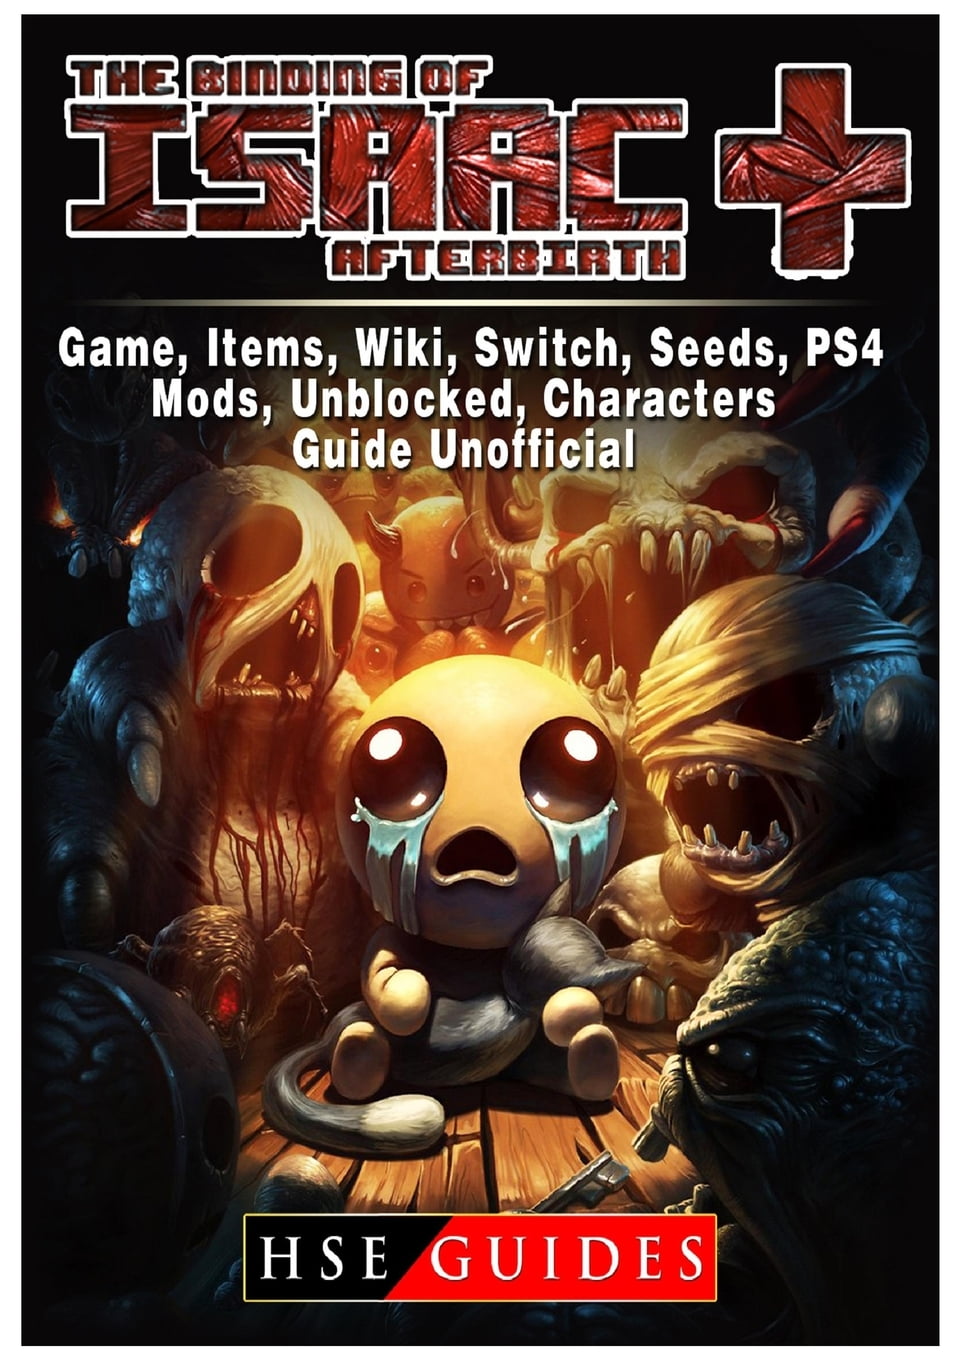 The Binding of Isaac Afterbirth Plus Game, Items, Wiki, Switch, Seeds, PS4,  Mods, Unblocked, Characters, Guide Unofficial (Paperback) 